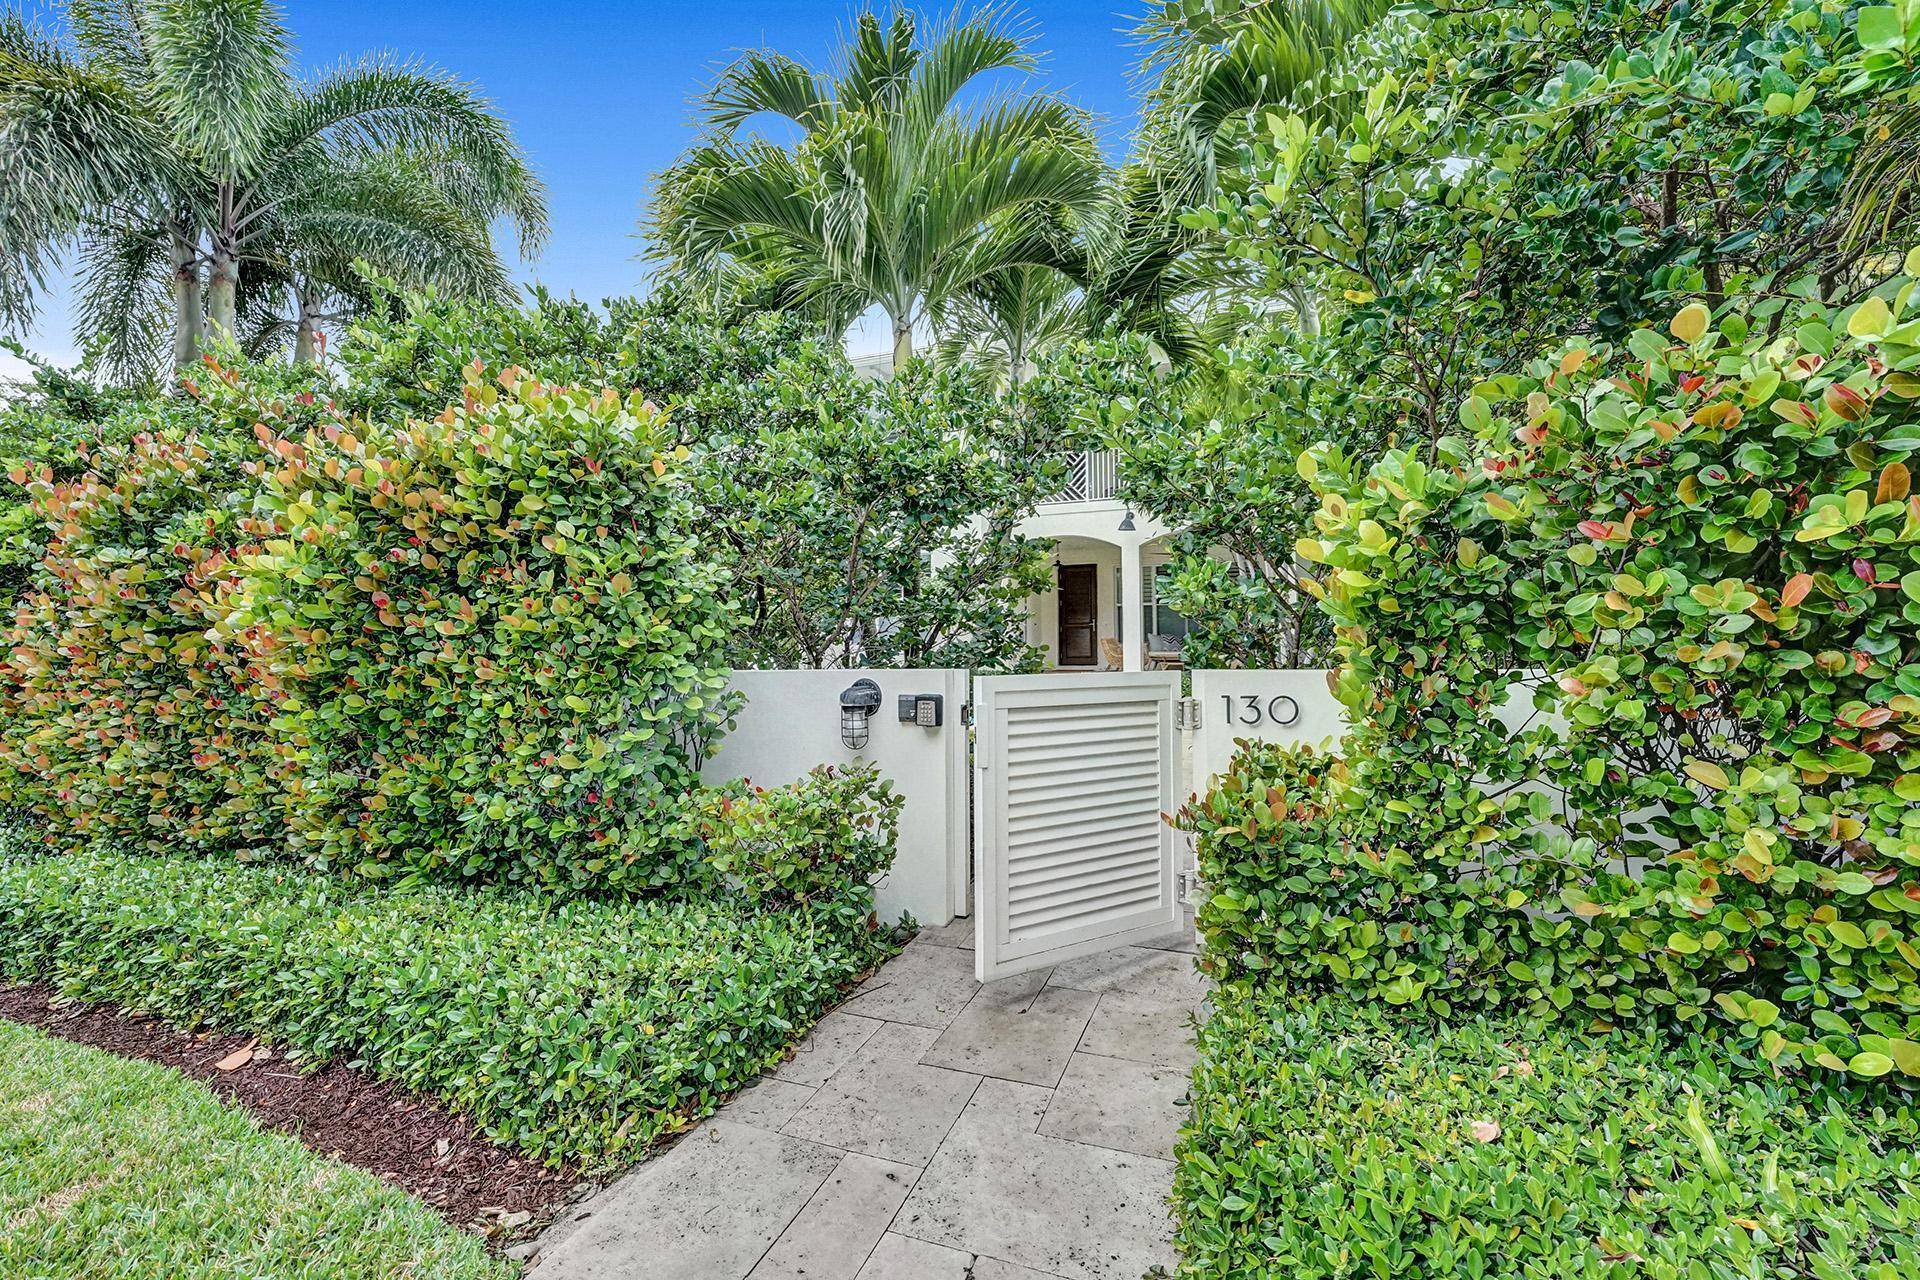 Custom courtyard residence, close to the ocean and within one block of downtown Delray Beach, invites indoor outdoor living with two tropically landscaped patio areas, one with a sun splashed ...